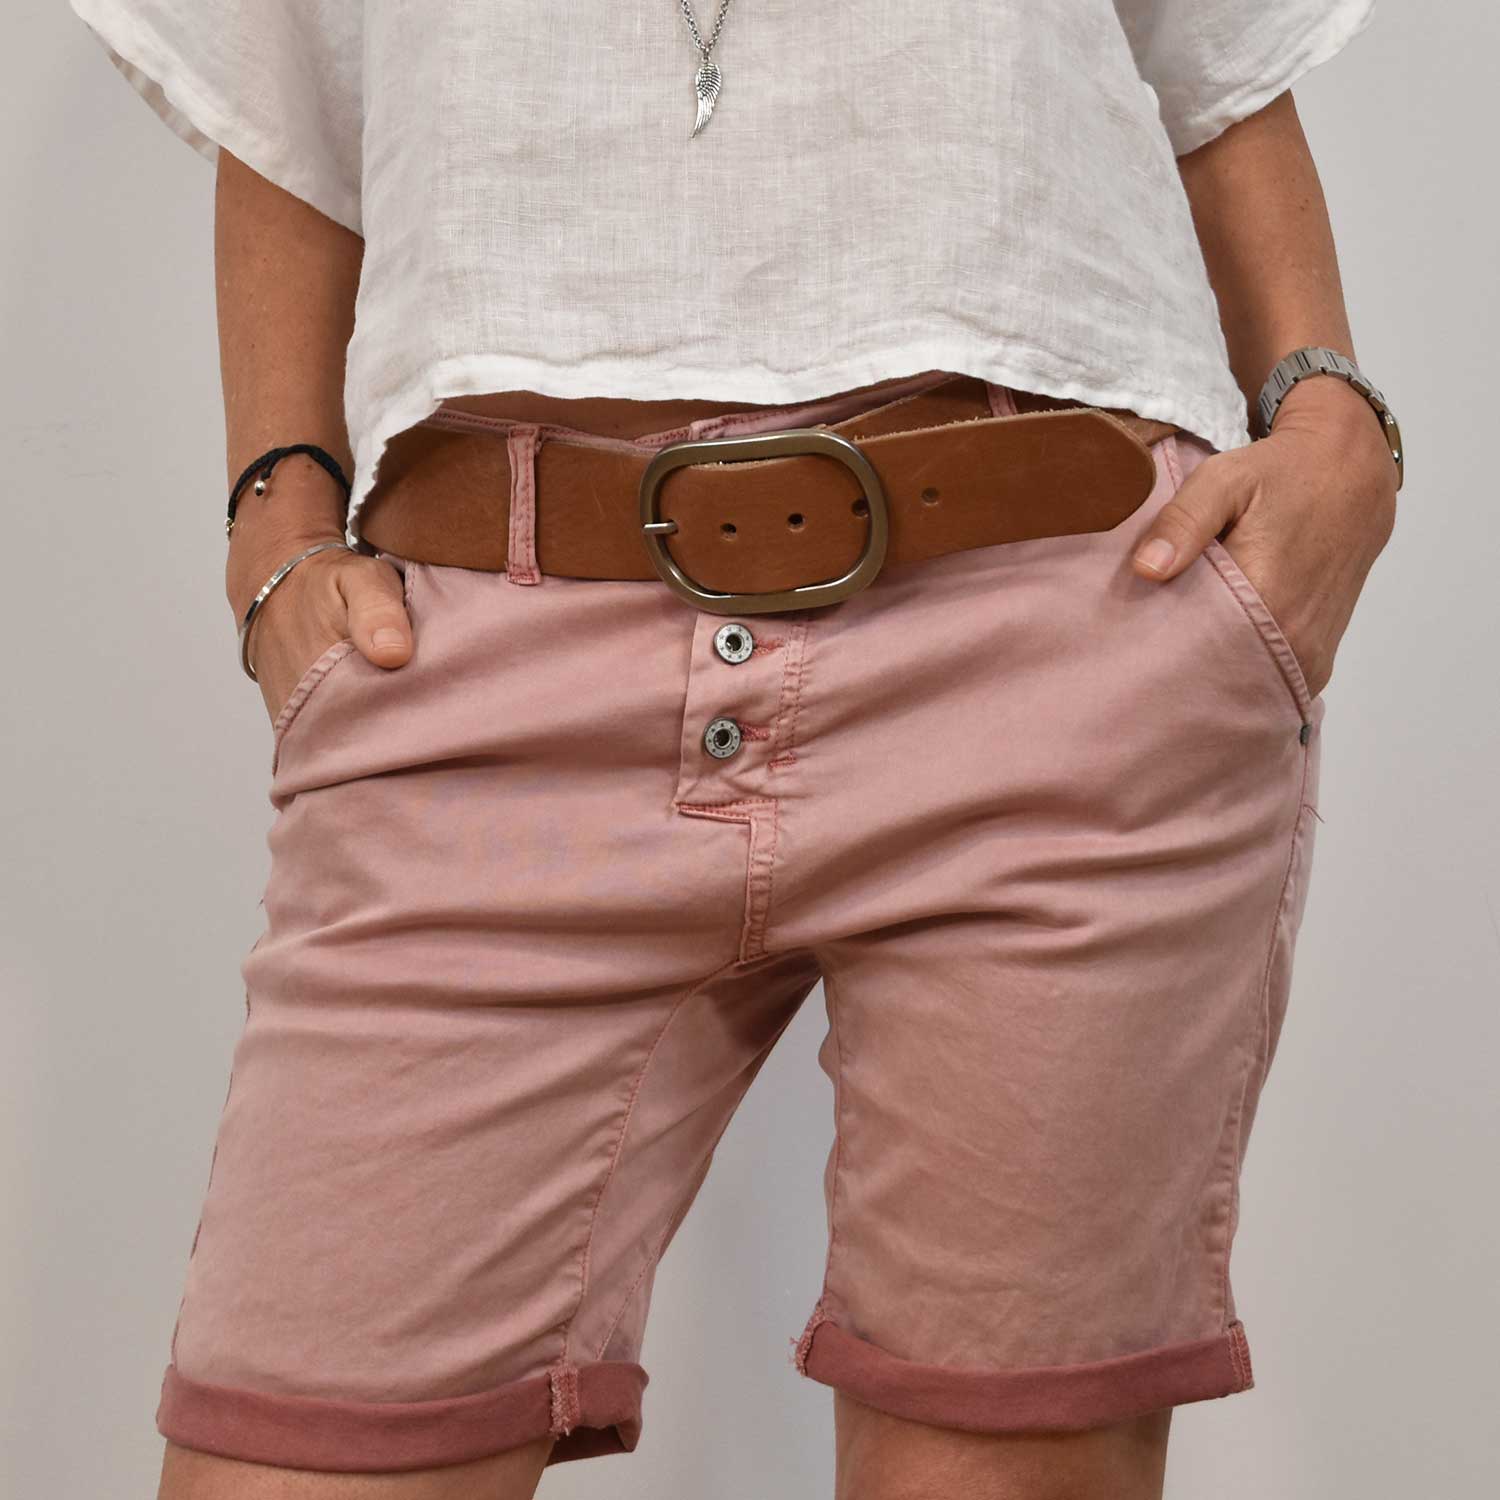 Pink buttons shorts